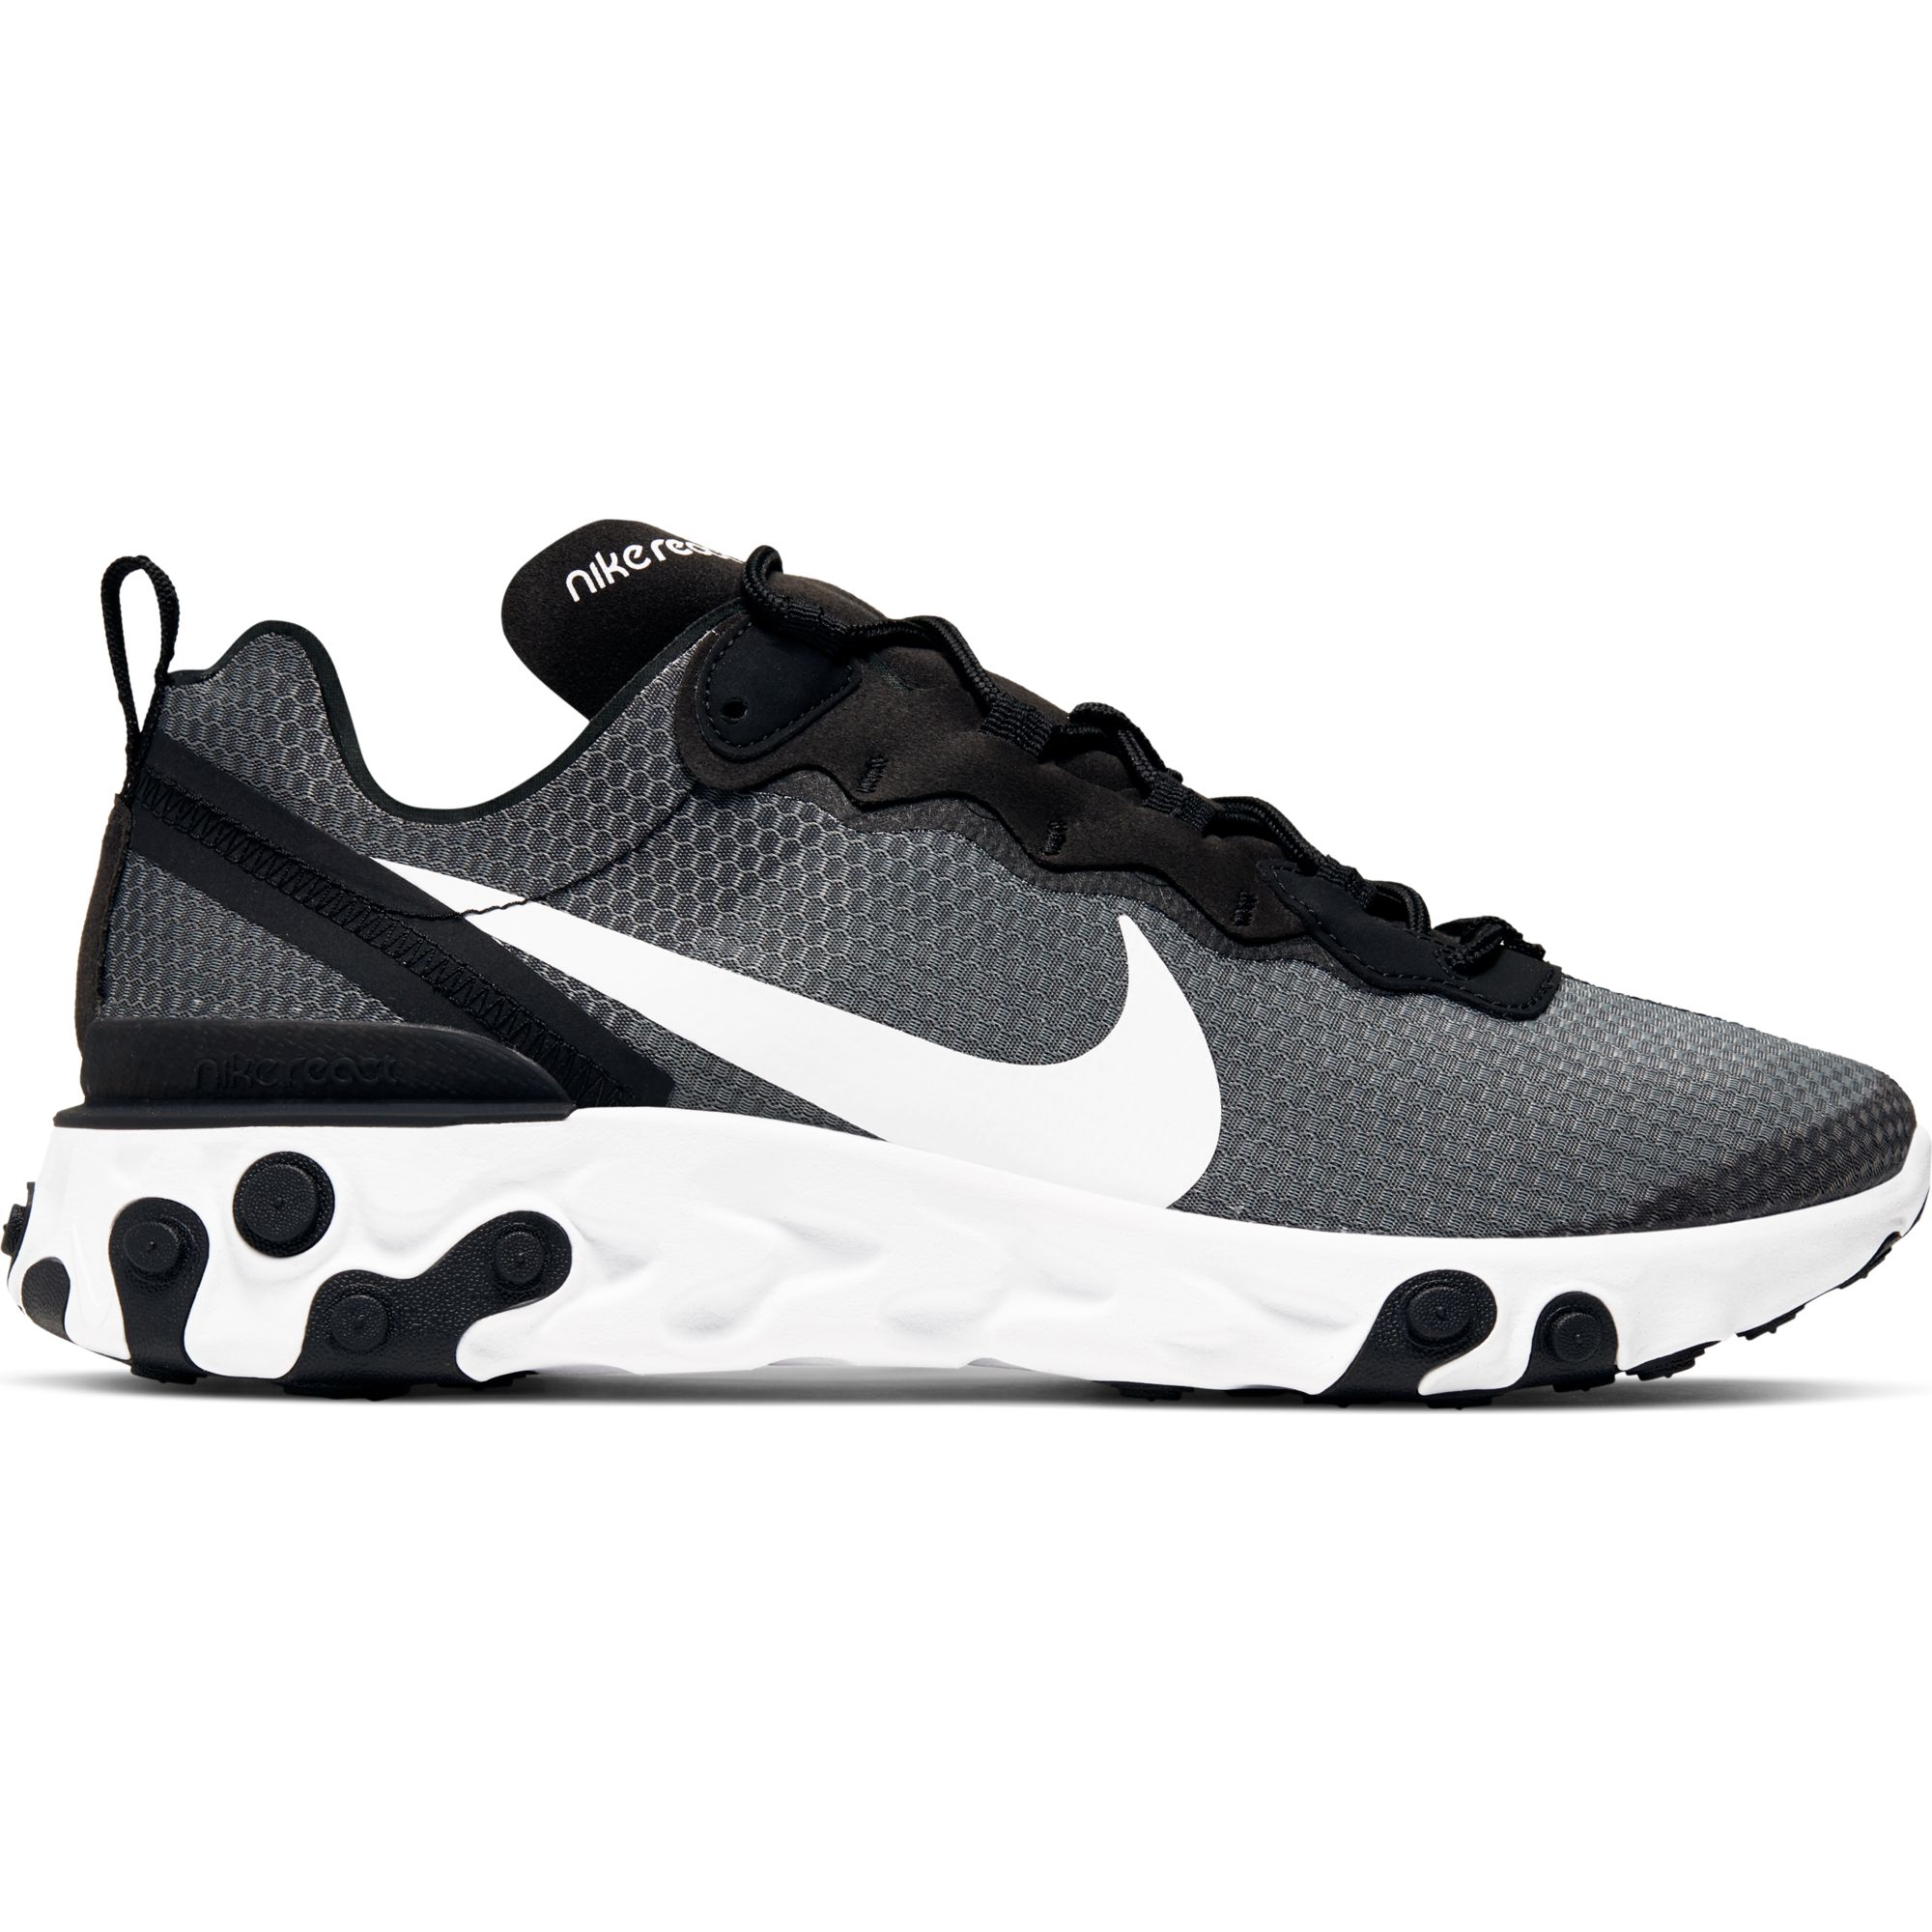 mike react element 55